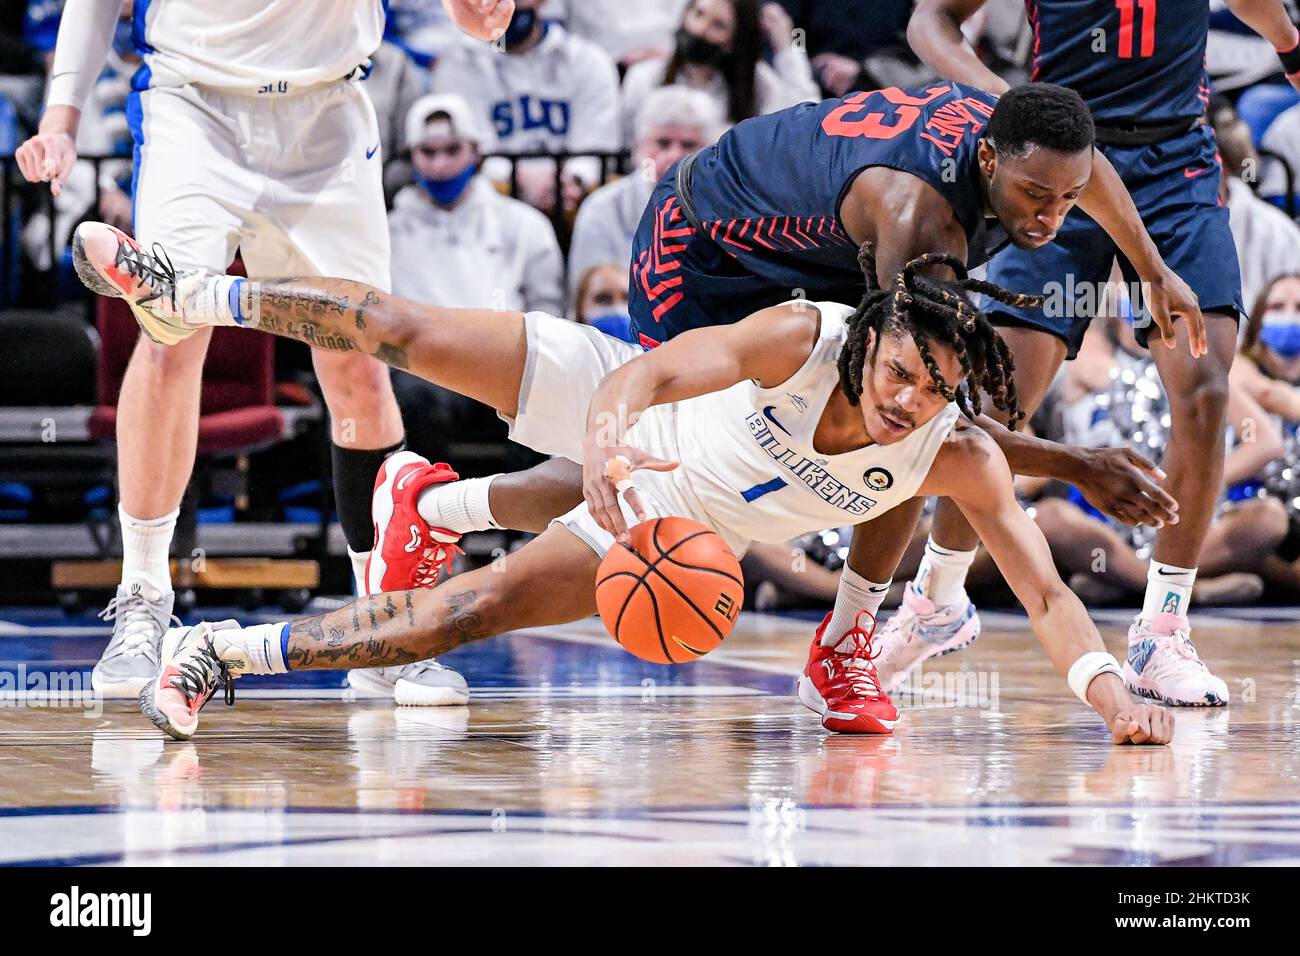 February 05, 2022: Saint Louis Billikens guard Yuri Collins (1) dives and grabs the loose ball in front of Dayton Flyers forward R.J. Blakney (23) in a A-10 conference game where the Dayton Flyers visited the St. Louis Billikens. Held at Chaifetz Arena in St. Louis, MO Richard Ulreich/CSM Stock Photo